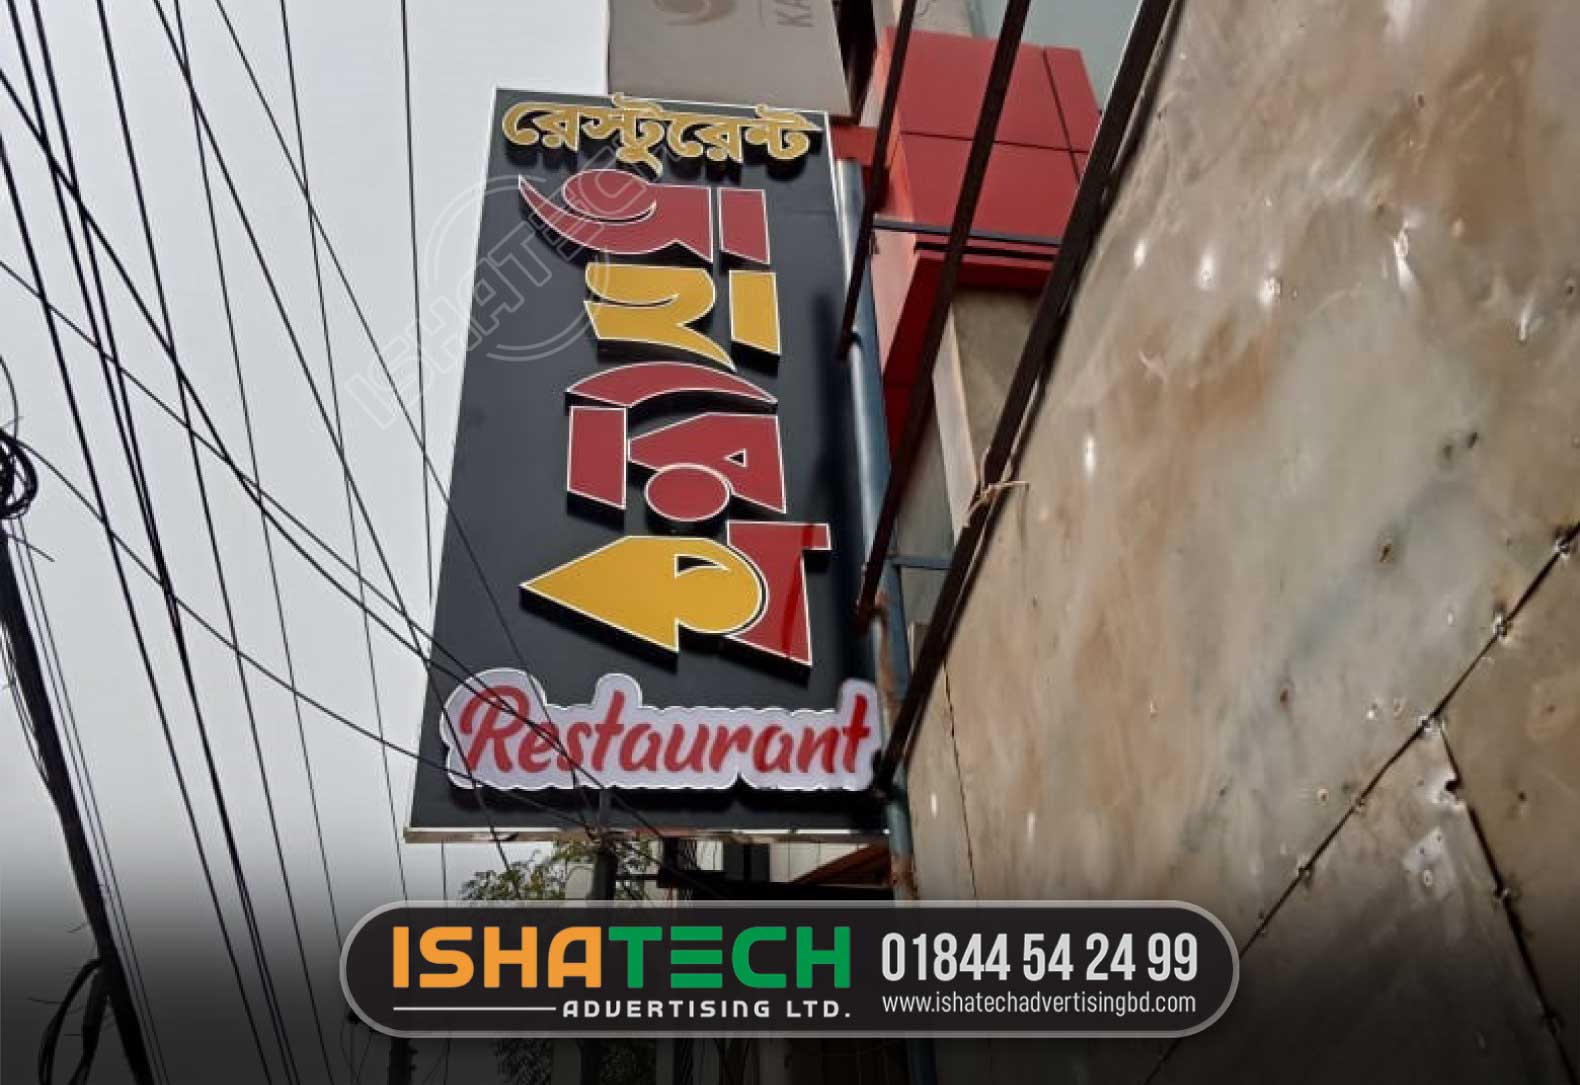 AHARIKA RESTAURANT LETTER SIGANGE, LETTER SIGNAGE CREATOR DHAKA, ACRYLIC LETTER CREATOT DHAKA BANGLADESH, Acrylic Letters Digital Sign Maker in Dhaka -Acrylic Letters-Metal Frames. Acrylic Items-background-acrylic-letters. Best Led Acrylic Letter Signage Company in Bangladesh. Acp Board SS And Acrylic Letter with Led Light for Outdoor. Best for Acrylic & SS Signage - Attractive & Long-Lasting Sign. Led Sign Acrylic Letter Price in Bangladesh-2022. LED Sign Acrylic Top Letter LED Light Box Acrylic Letters. Acp Board Acrylic Sign Letter with Led Lighting. ACP Acrylic Letter Sign Board for business. Acp Off Cut Acrylic Letter And LED Lighting Signboard. liquid acrylic letters price Bangladesh. Acp Board Backlit Acrylic Letter with Led Lighting Sign. Green Acrylic Letter Led Lights Sign Board Acp. Acrylic Letters. Cut Acrylic Lettering. Acrylic Letters and Numbers for Signs. Acrylic Letters and Numbers. Plastic Letters - Acrylic. 3D Acrylic Letter Signage. Largest Acrylic Sign Letters Online. Acrylic Sign Letters for Walls. 12 inch Acrylic Letters For Signs. laser cut acrylic sign letters. Acrylic Letters and Numbers. Cut Acrylic Lettering. 3D SS Top Letter with Warm & White Color Led Light Advertising BrandingAcp Board SS Bata Model Letter Sign. LED SS Bata Model Letter. Digital SS Sign & Bata Model Led Letter with Glow. SS Top letter Bata model signage. LED SS Bata Model Letter. Bata Model Letter Signage. Terms and Conditions: